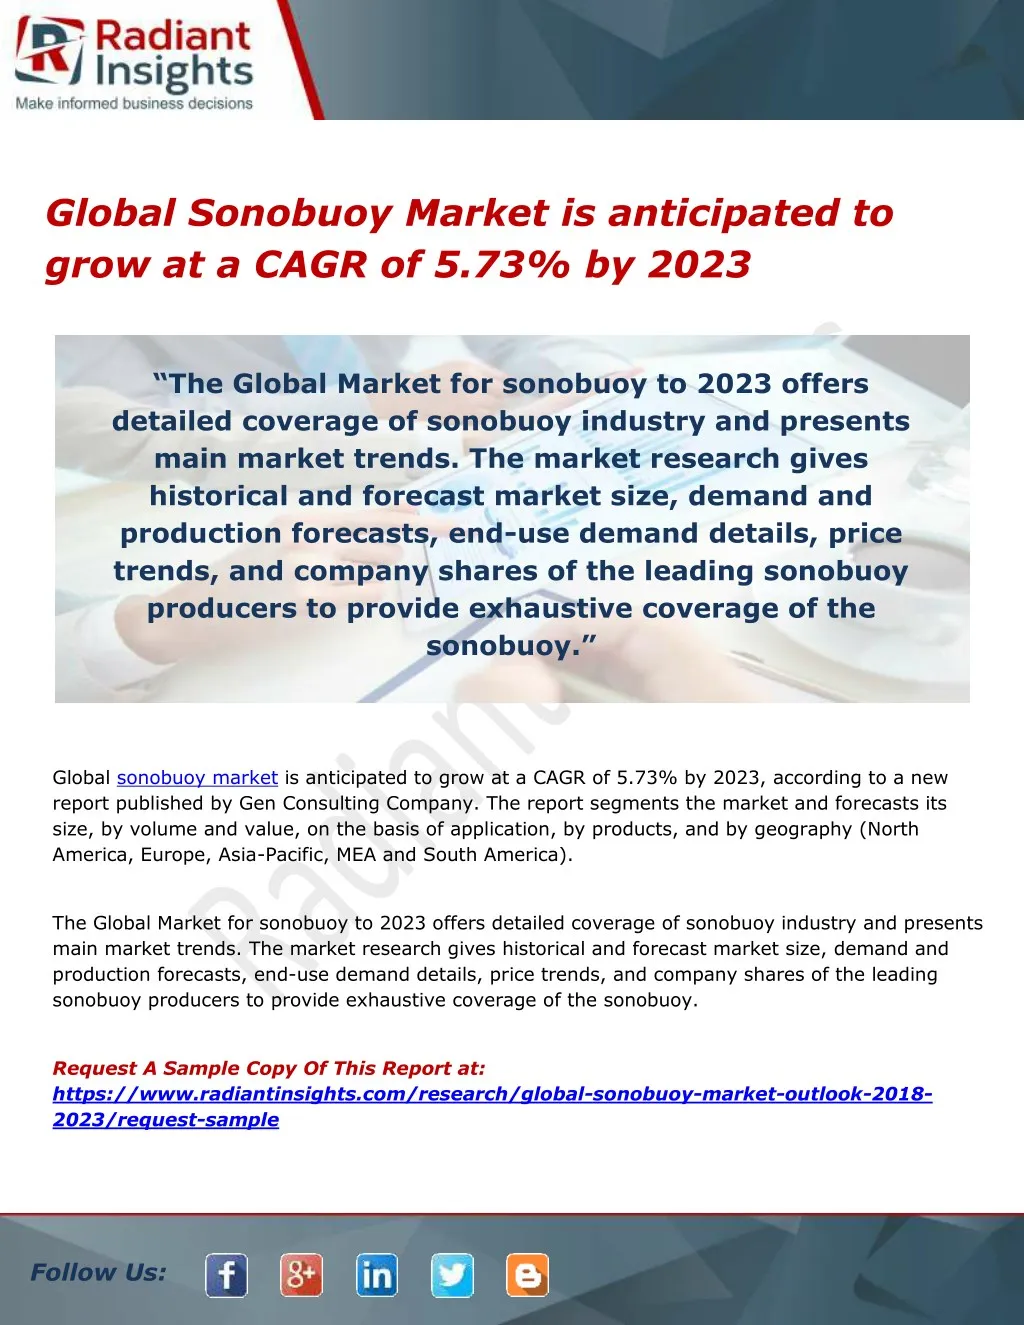 global sonobuoy market is anticipated to grow